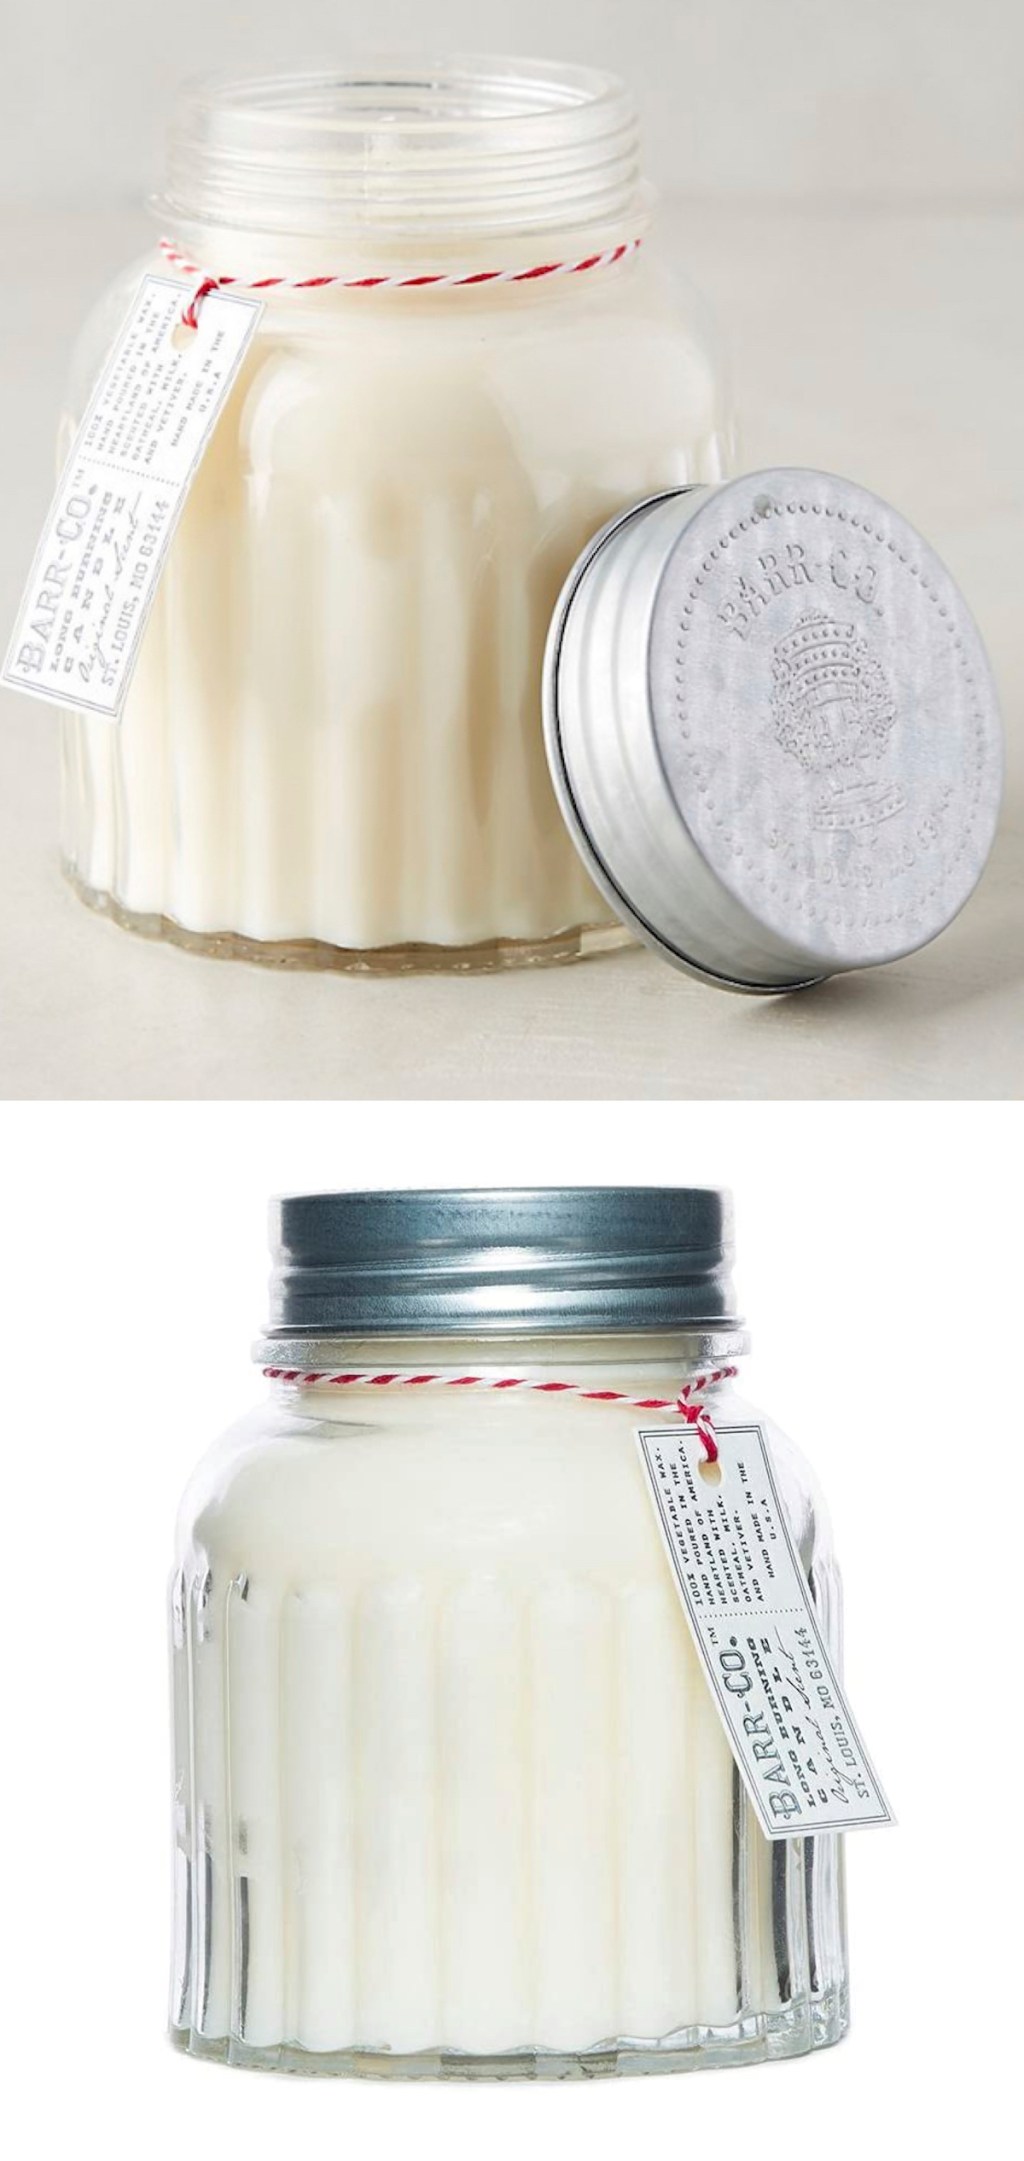 two cream colored glass jar candles with brand tag and christmas string